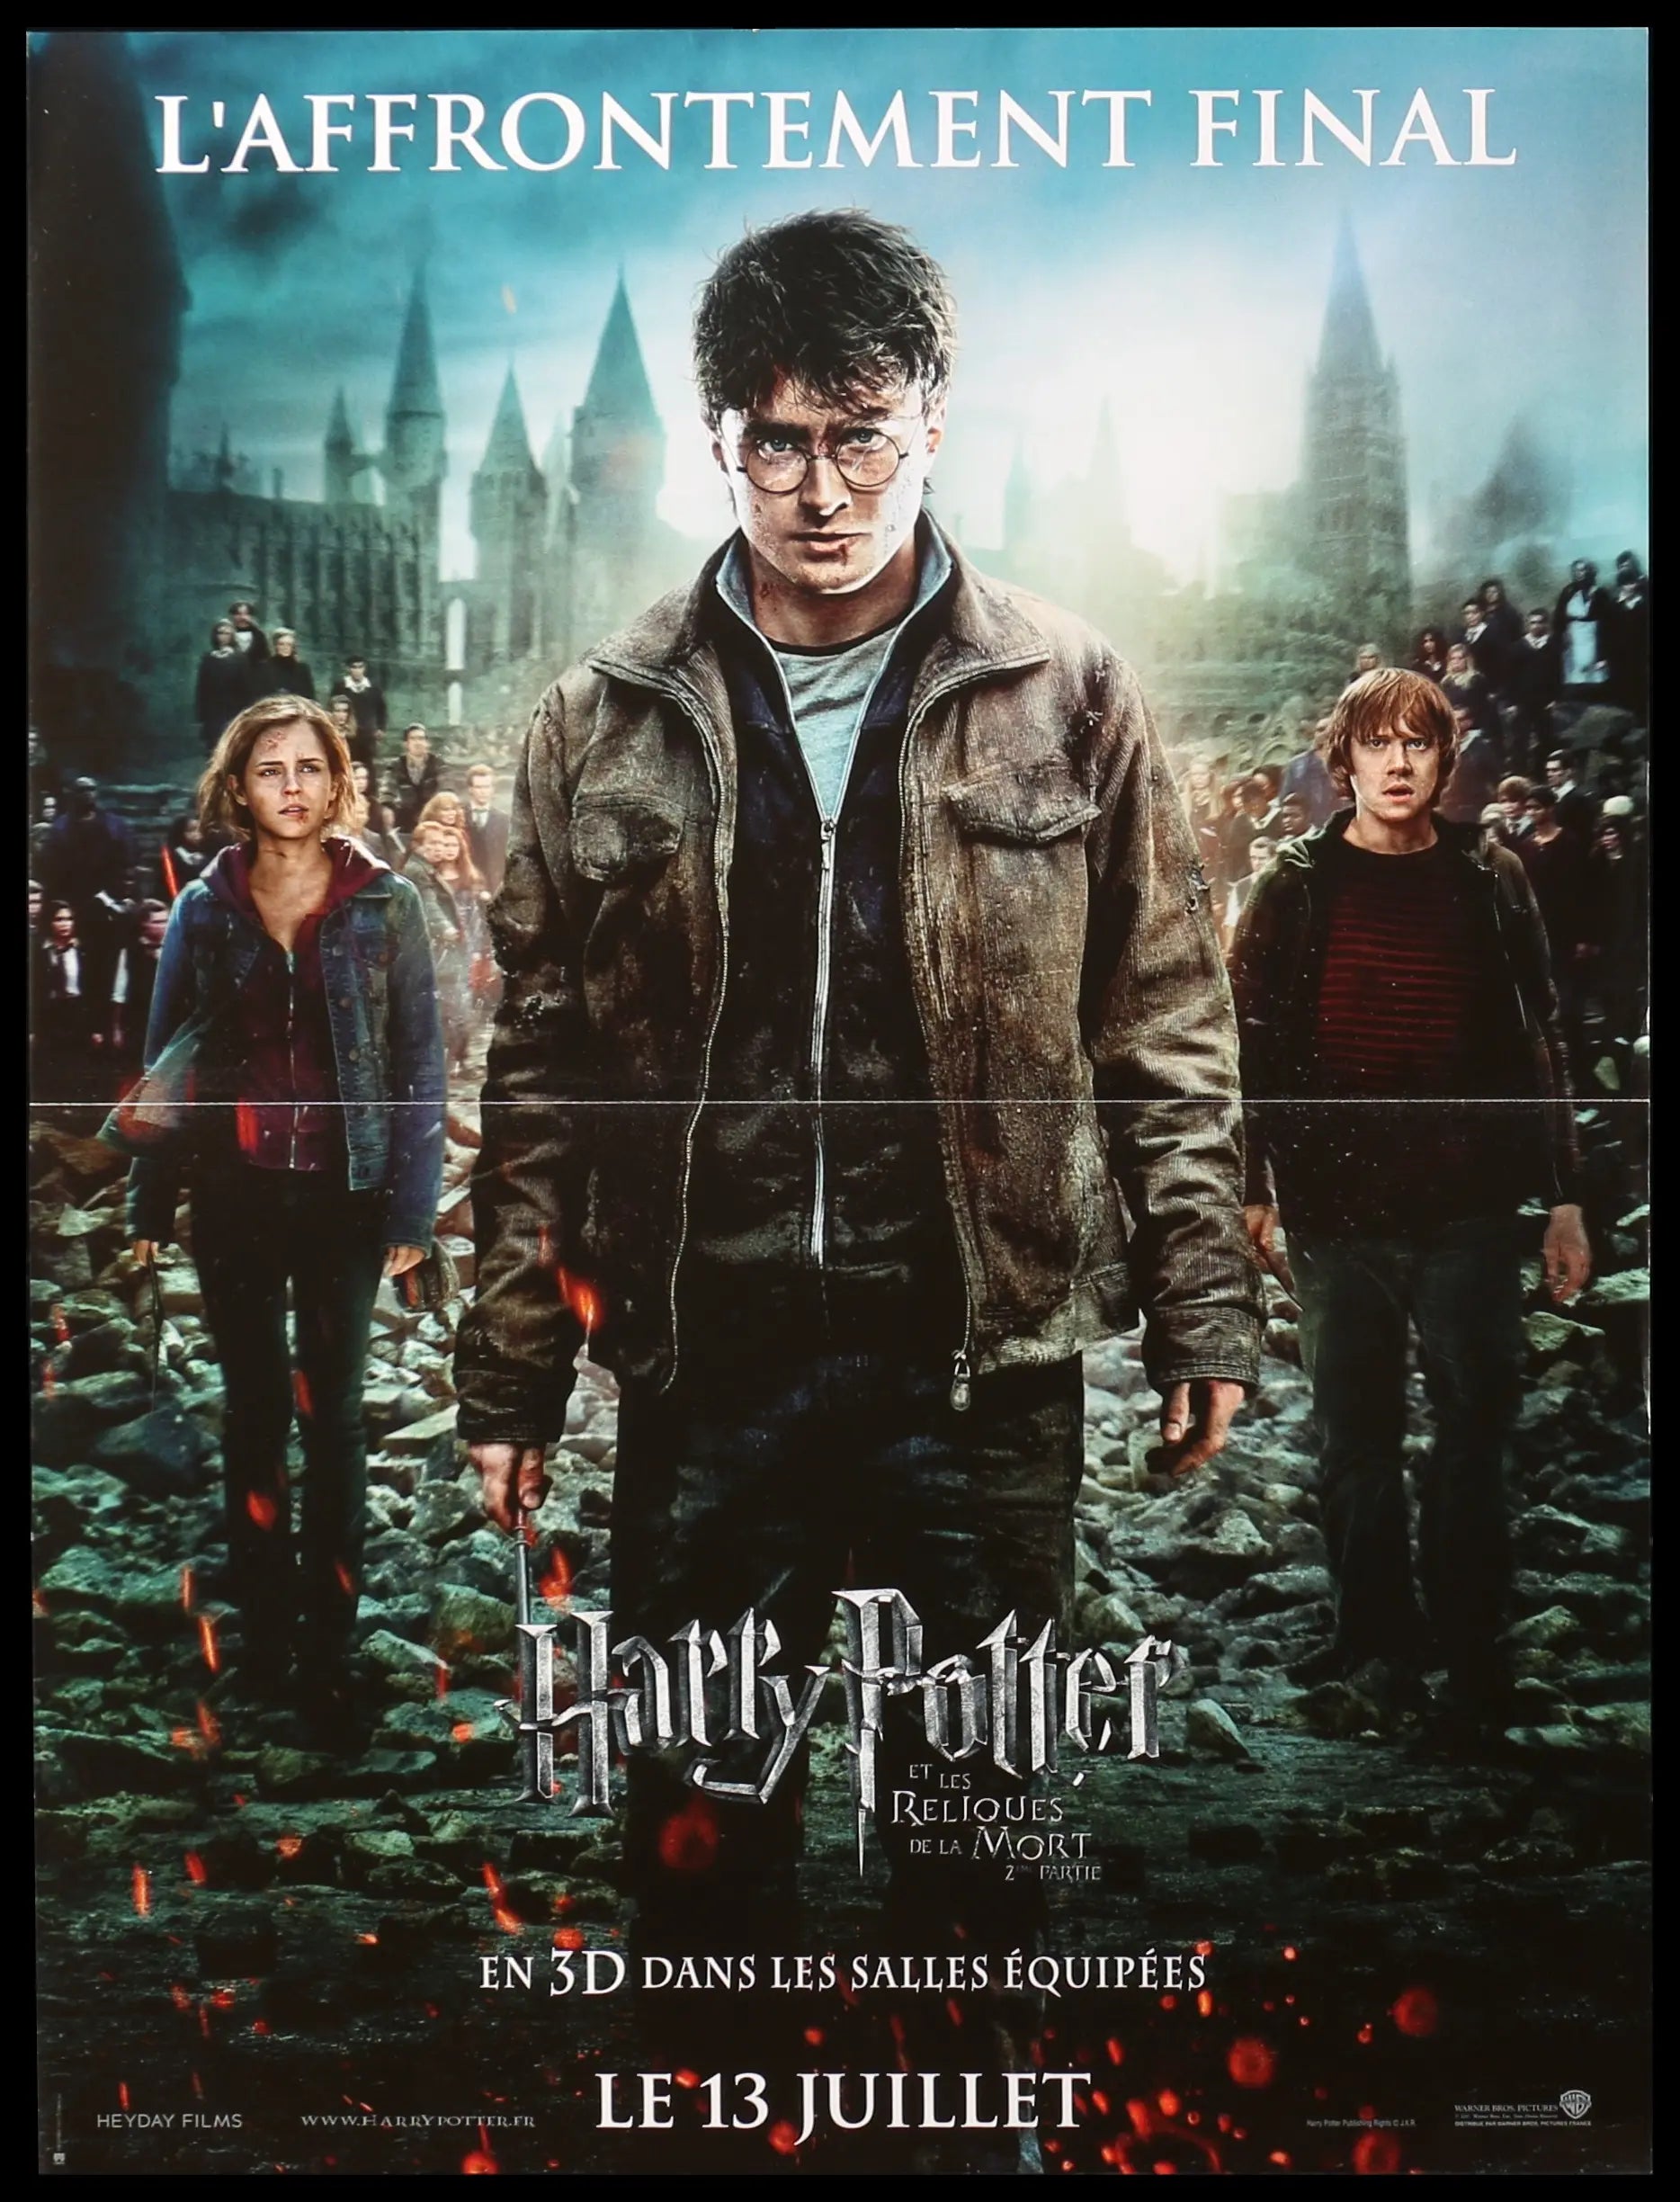 Harry Potter & The Deathly Hallows Part II